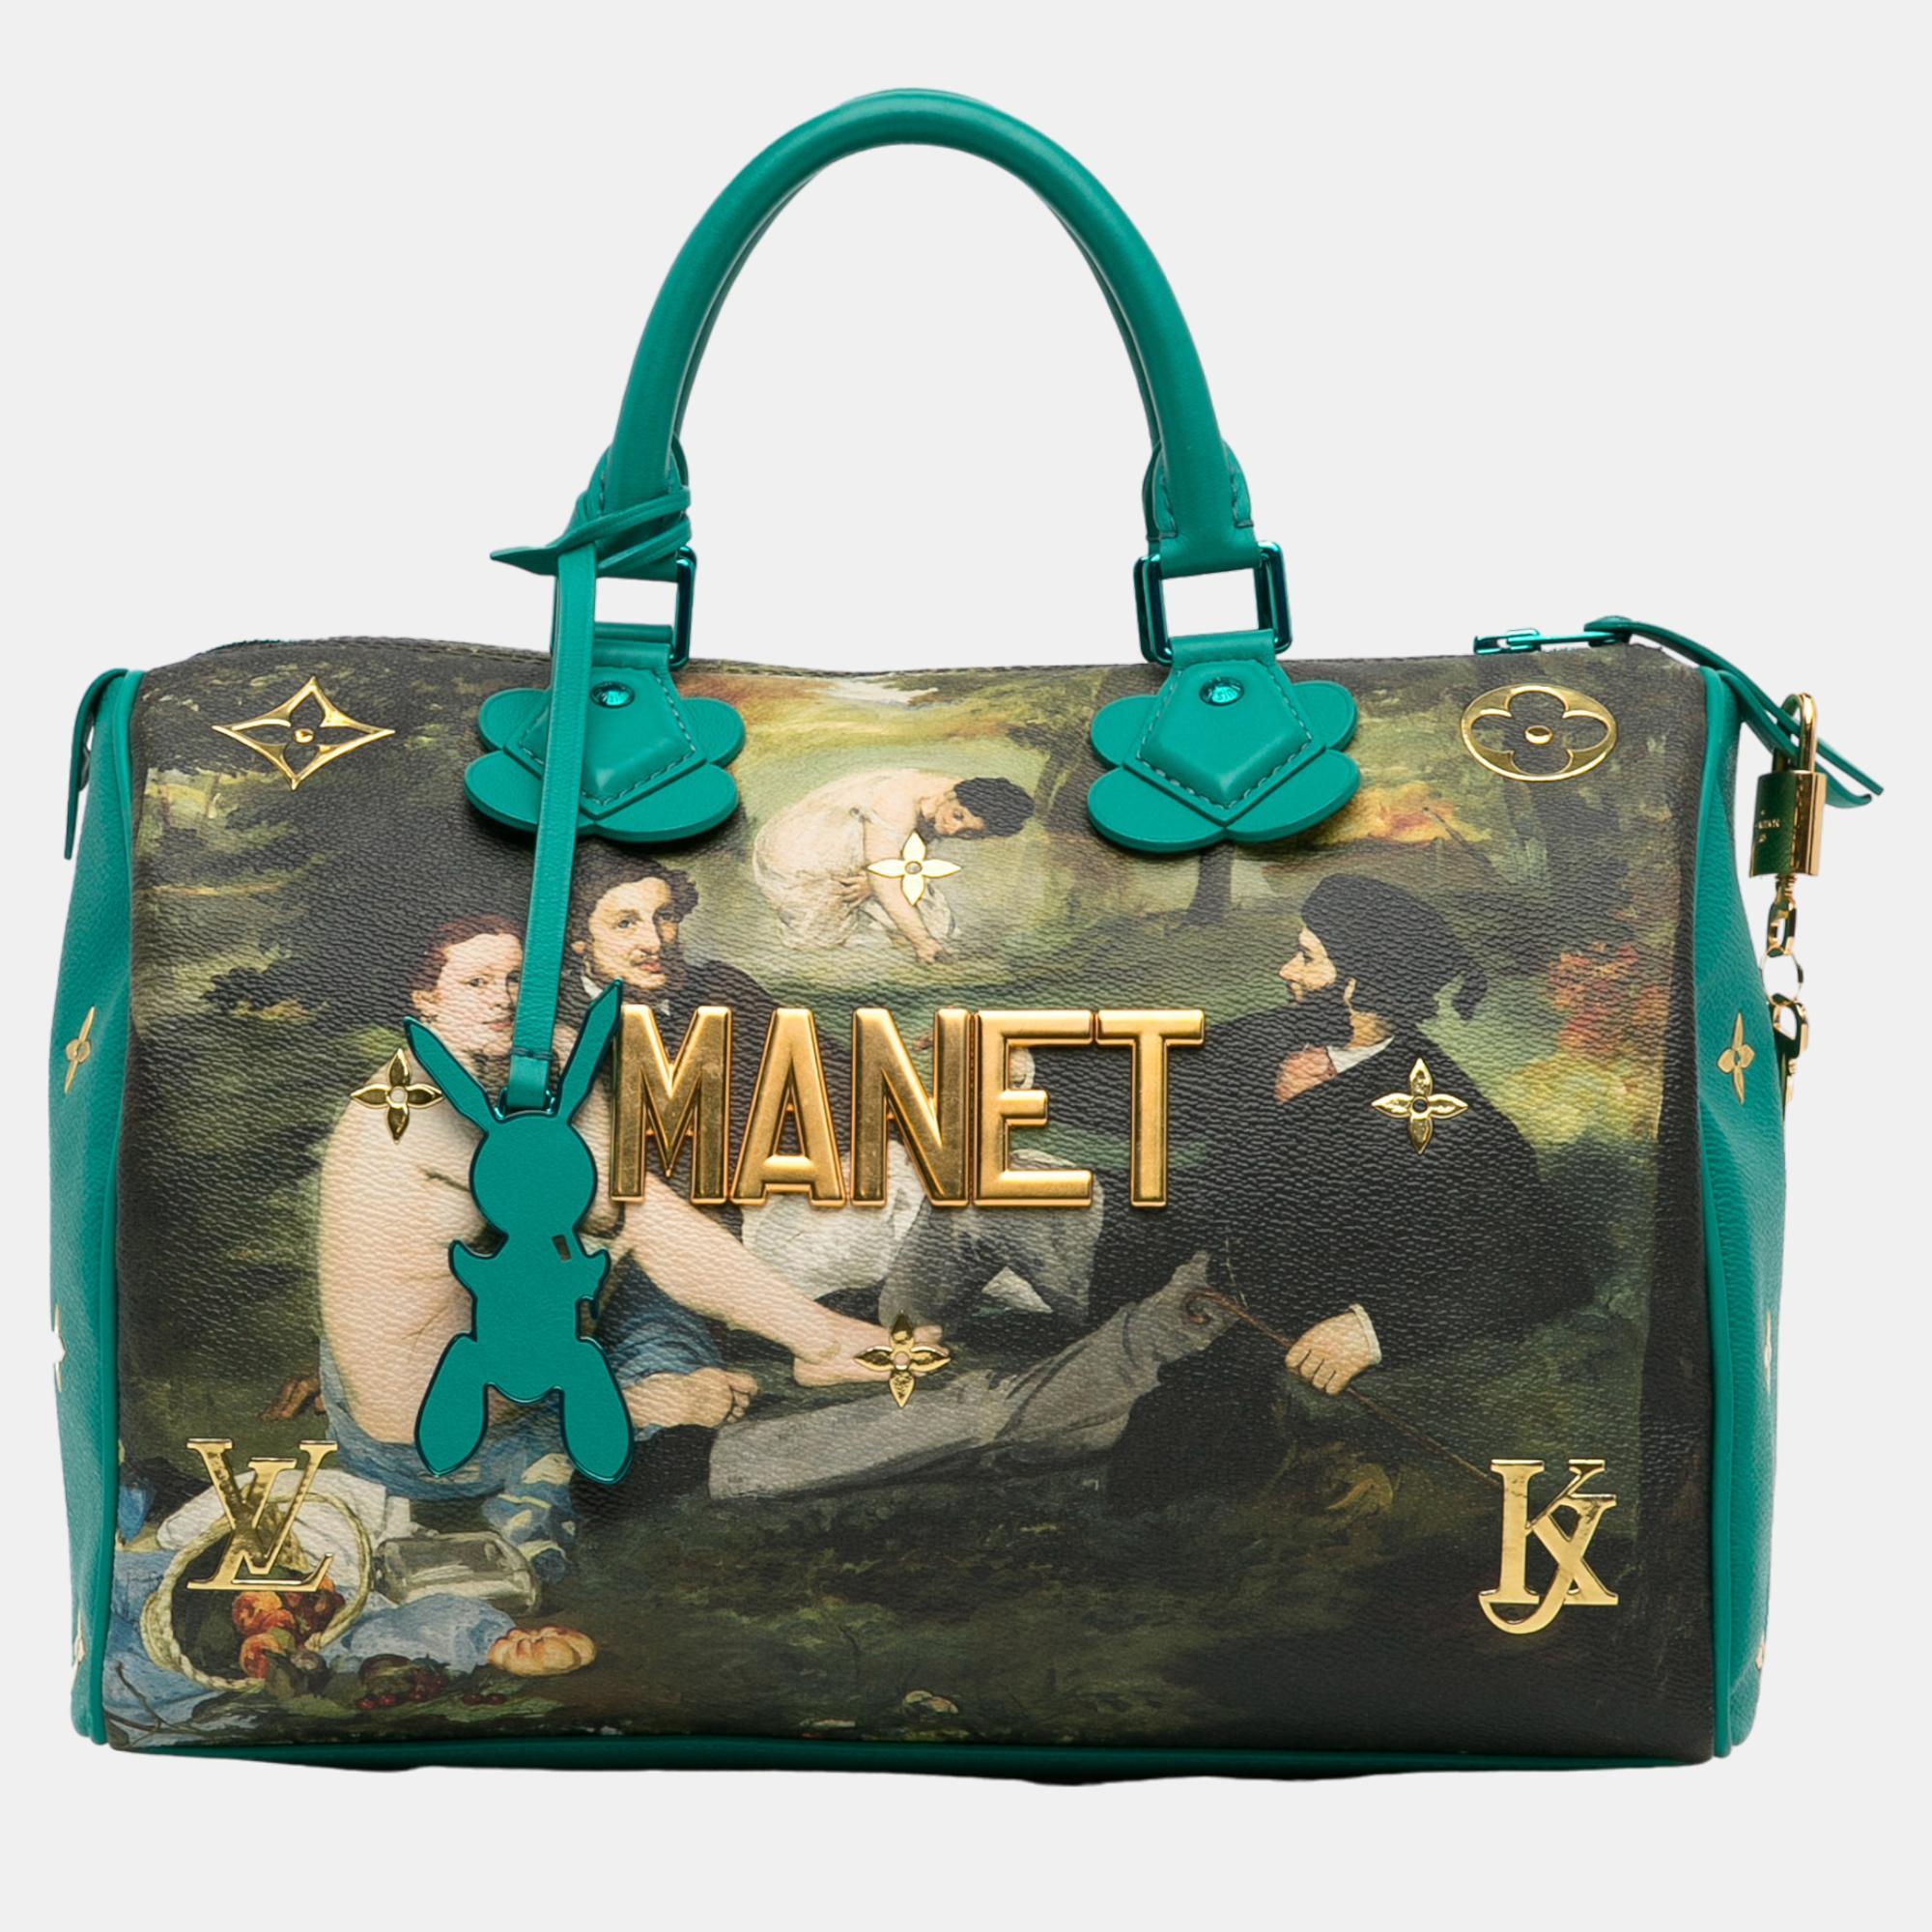 Louis vuitton x jeff koons multicolor masters collection manet speedy 30